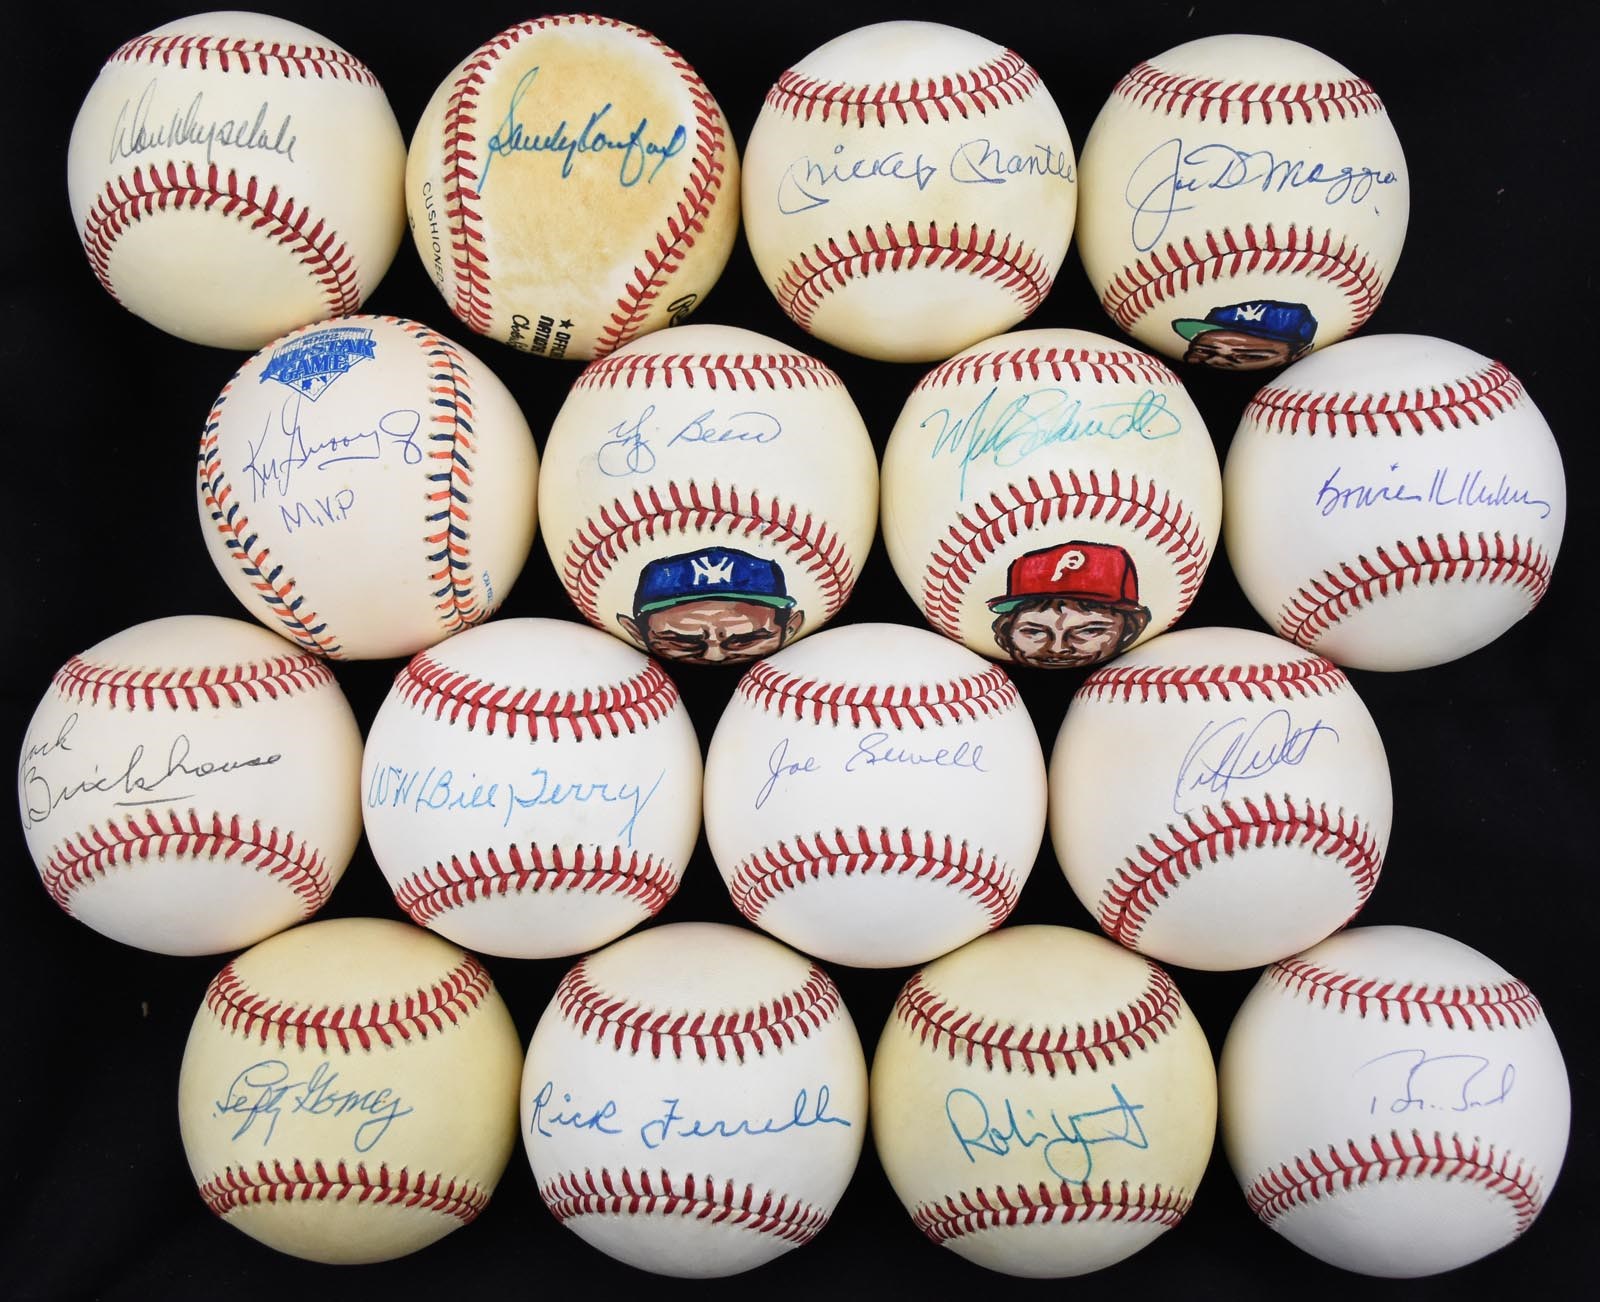 Baseball Autographs - Single & Team Signed Baseball Collection w/Hall of Famers - Mantle, Koufax, DiMaggio (50)